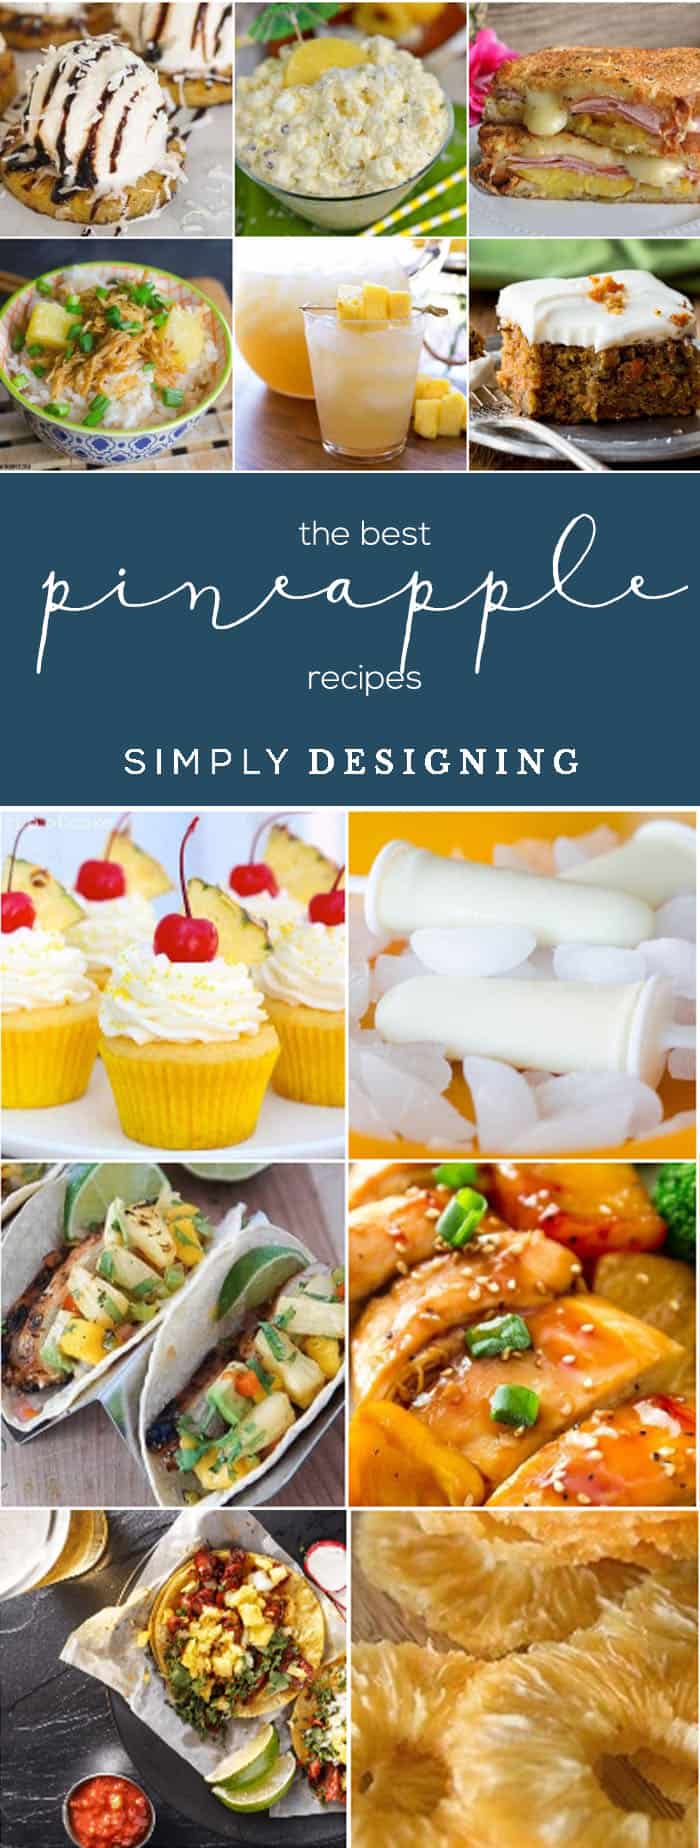 the best pineapple recipes pin | 25+ Pineapple Recipes for the Perfect Summer Treat | 29 | clean and organize